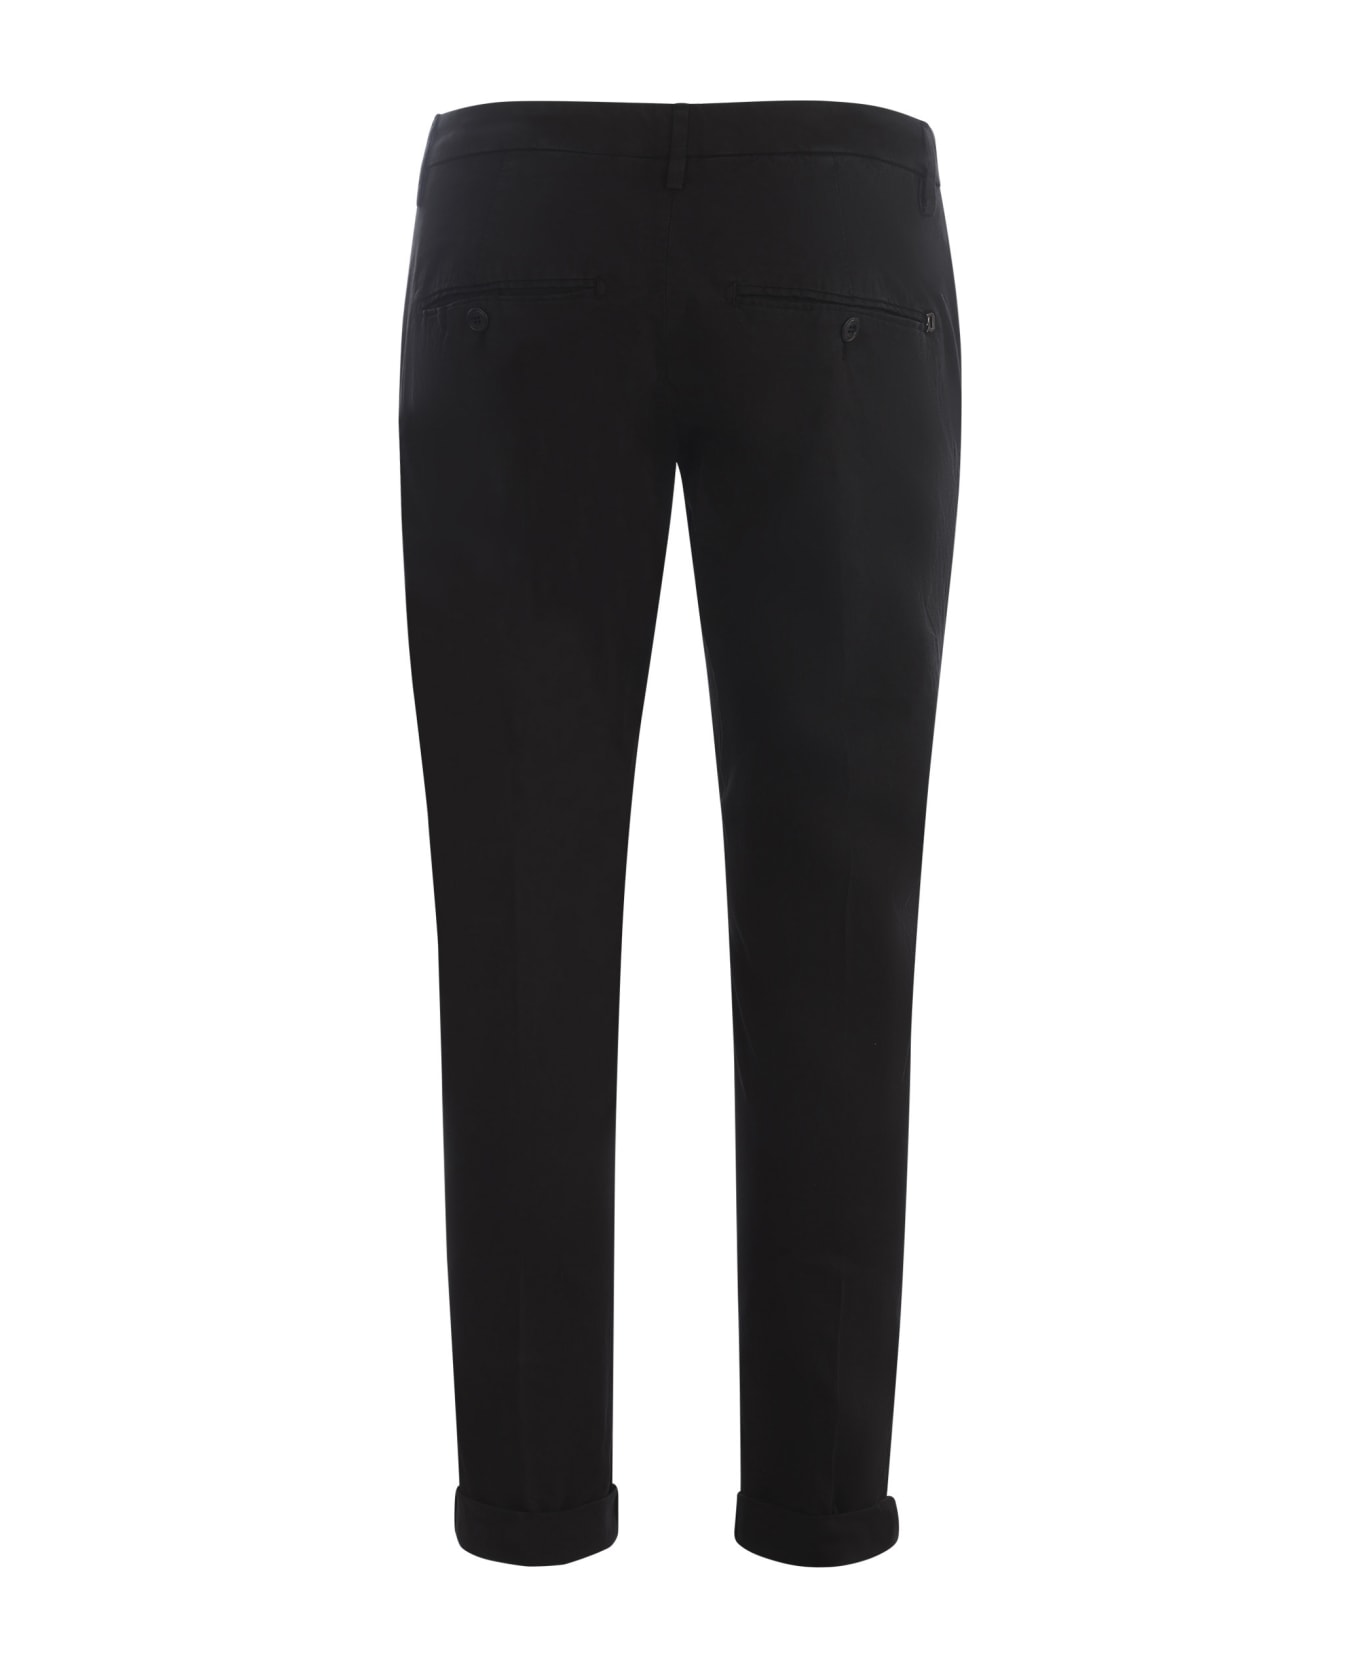 Dondup Concealed Skinny Trousers - Black ボトムス